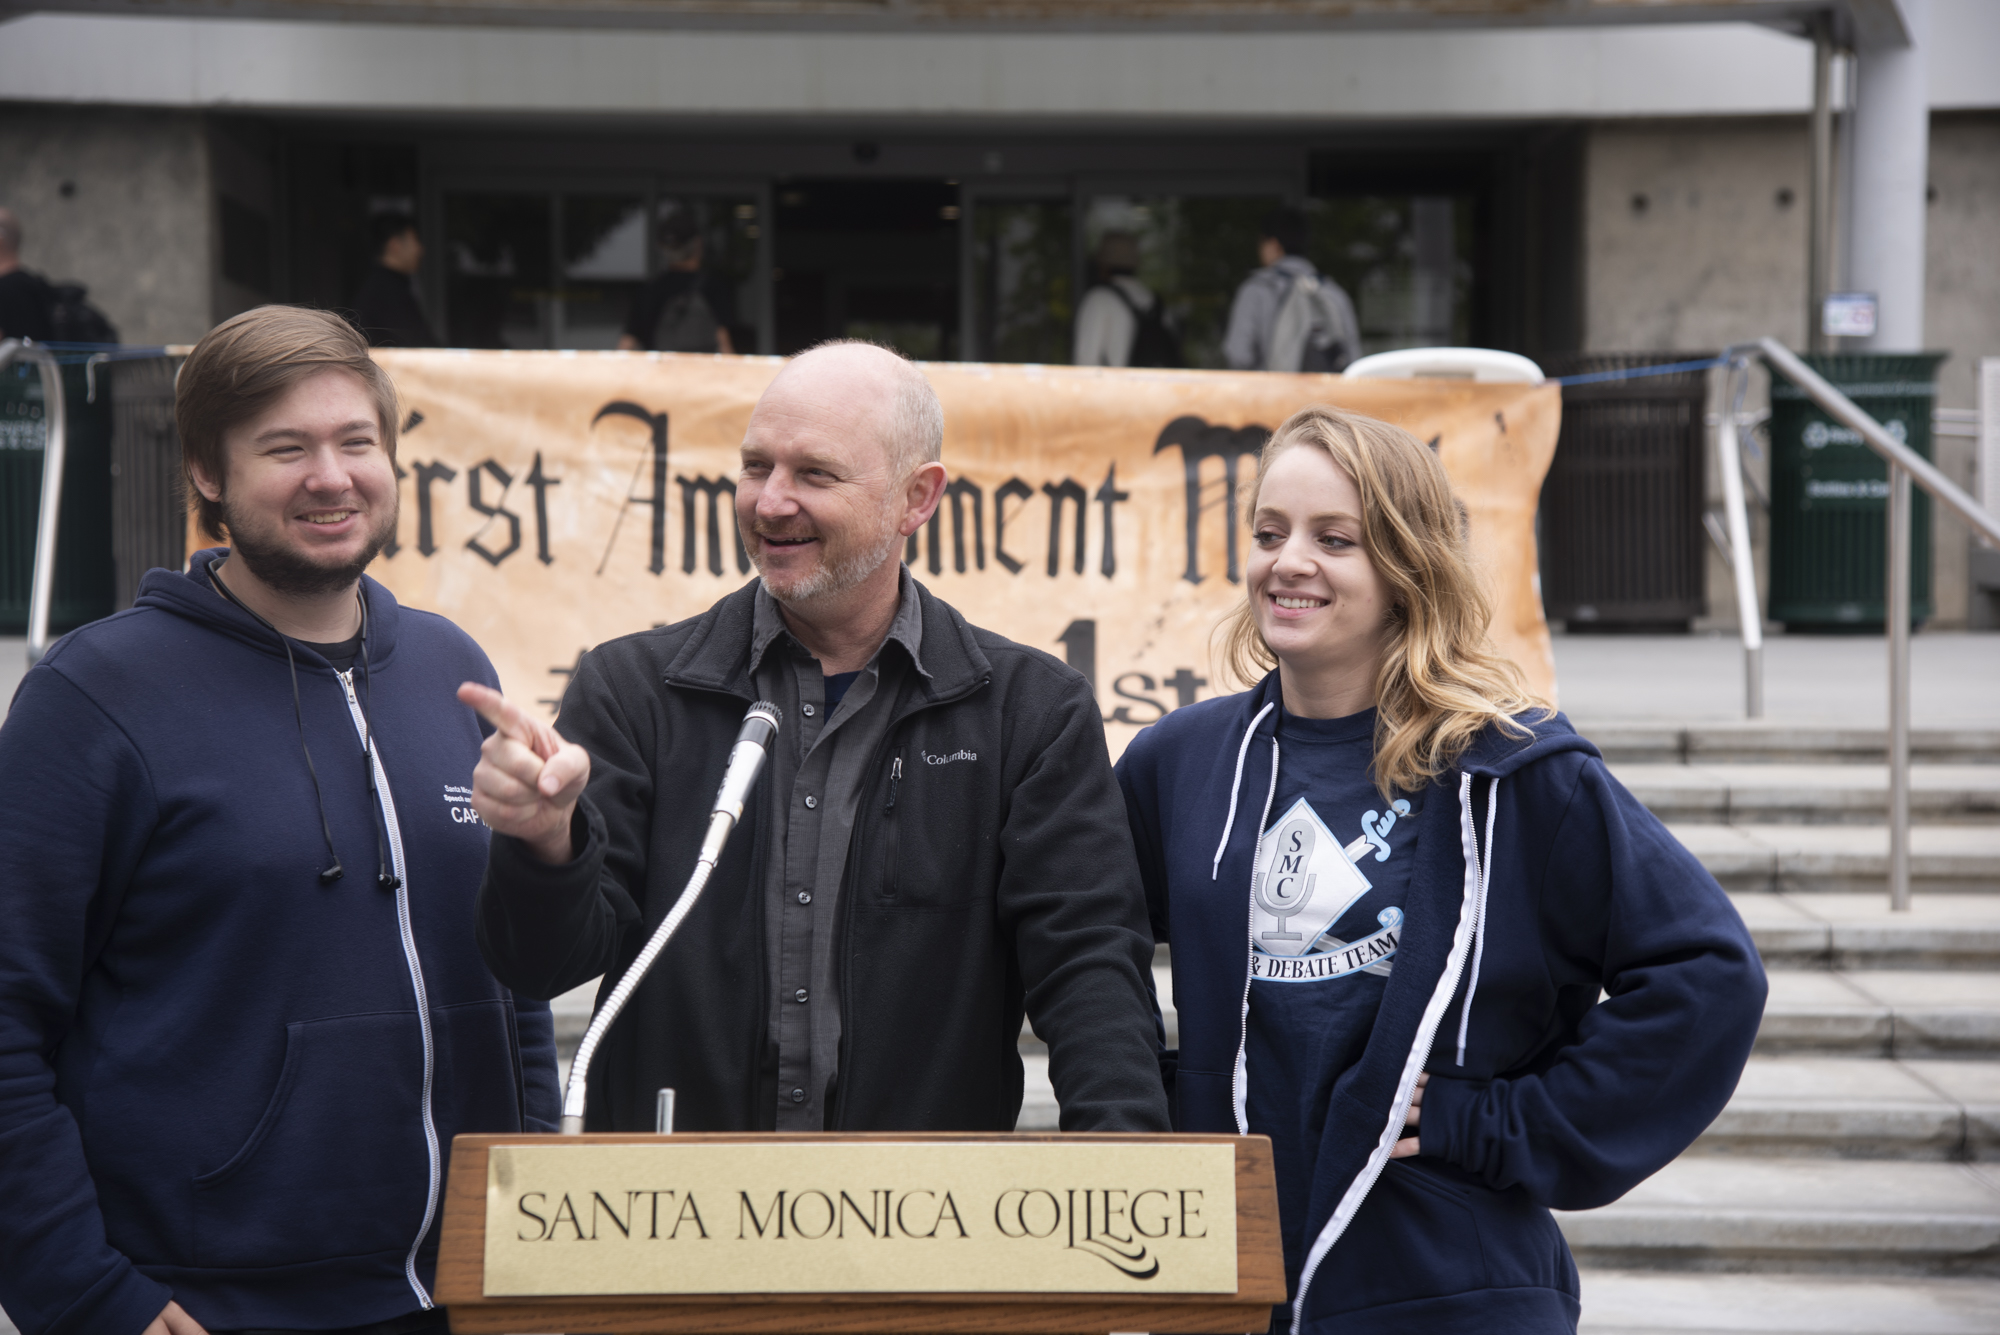  On May9 2019 at Santa Monica college in front of the library it was first amendment  mouth he Male debater was Dominic Smith, 25 econ major. The female debater was Shaindi Schwebel, 24 anthropology major. The teacher was Nate Brown and he is a commu